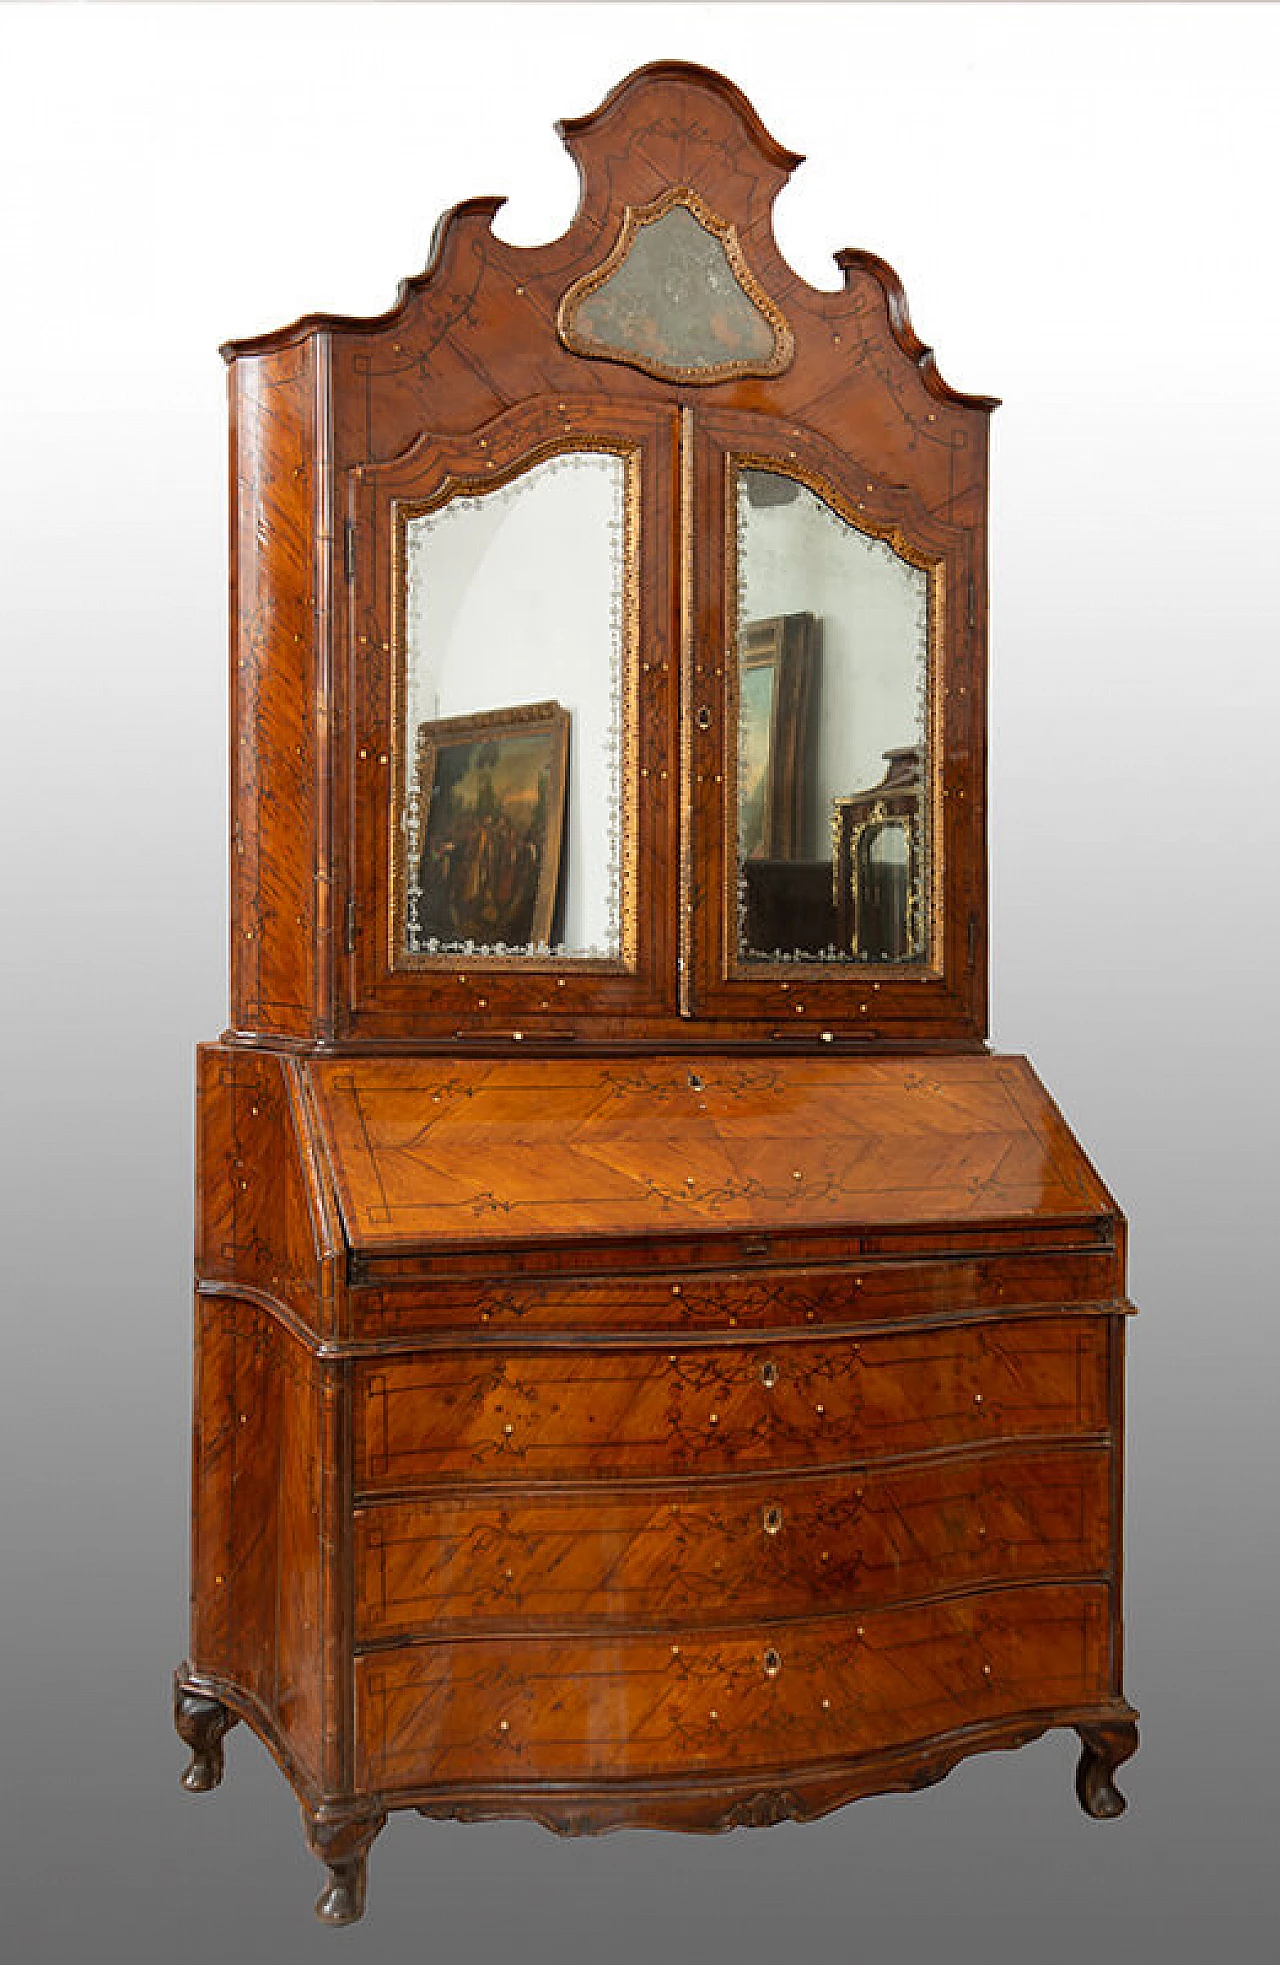 Trumeau Louis XV in walnut and exotic woods, 18th century 1